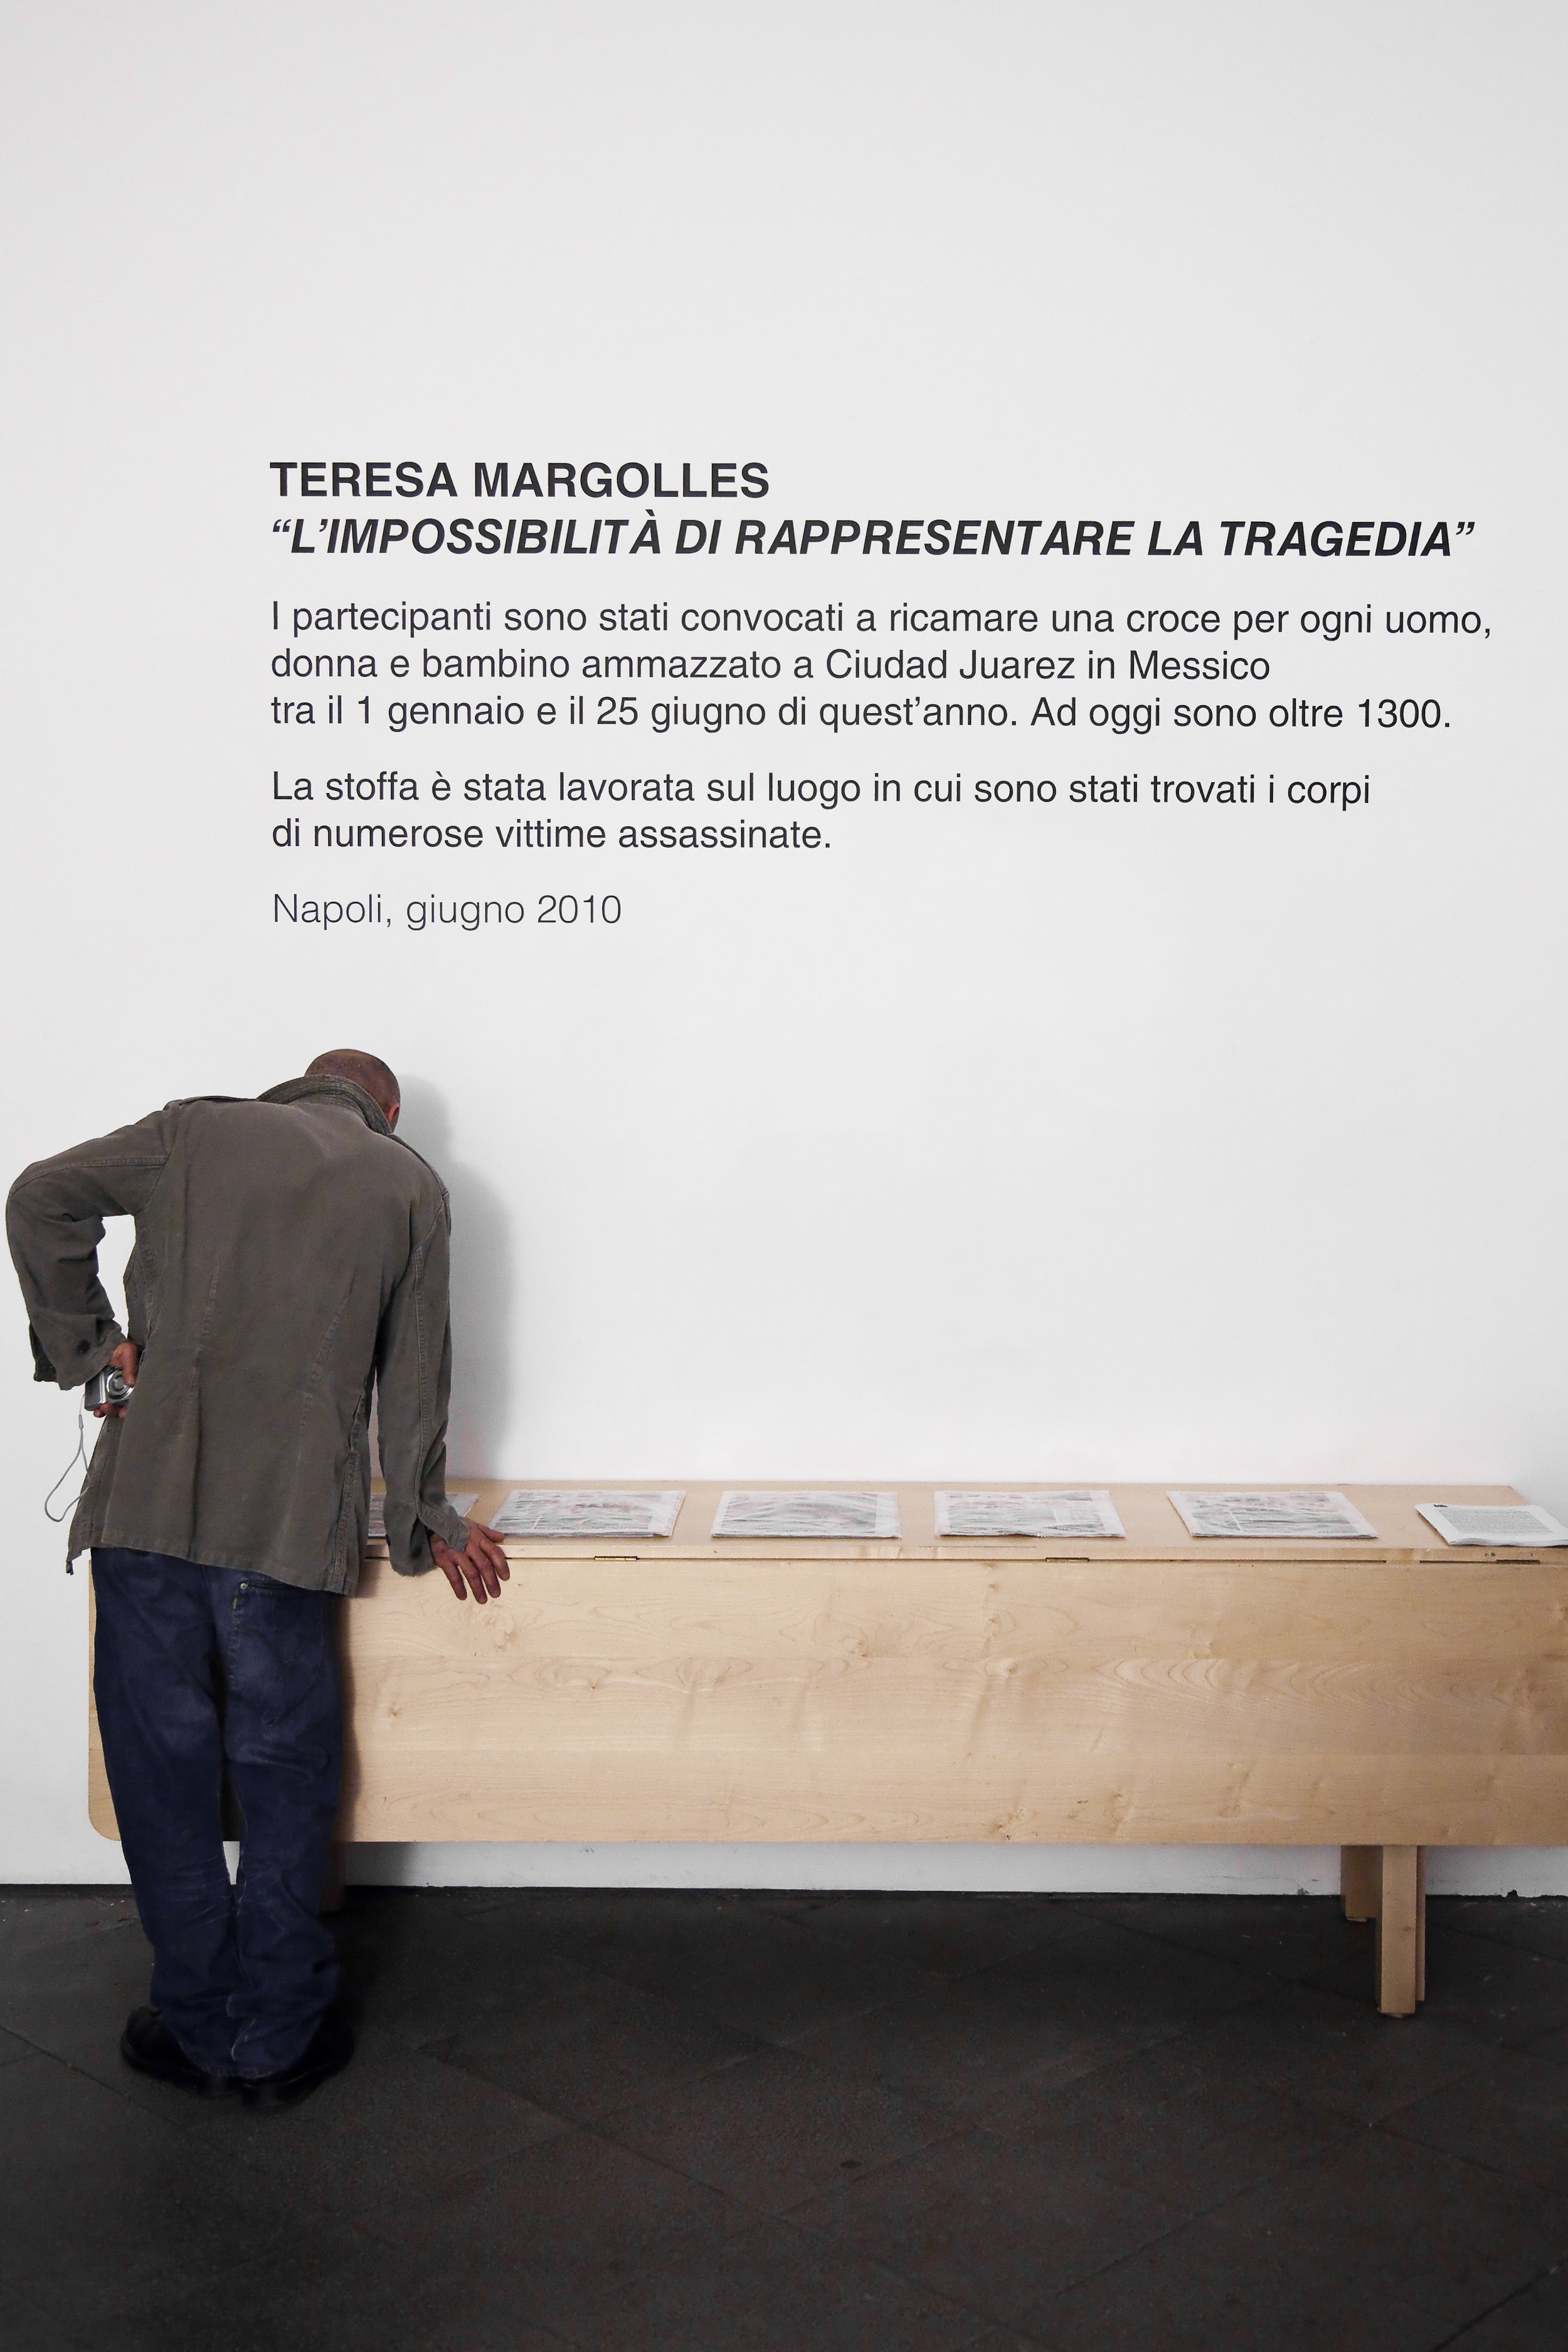  Teresa Margolles,  The Inability to Represent the Tragedy , photo A. Benestante 